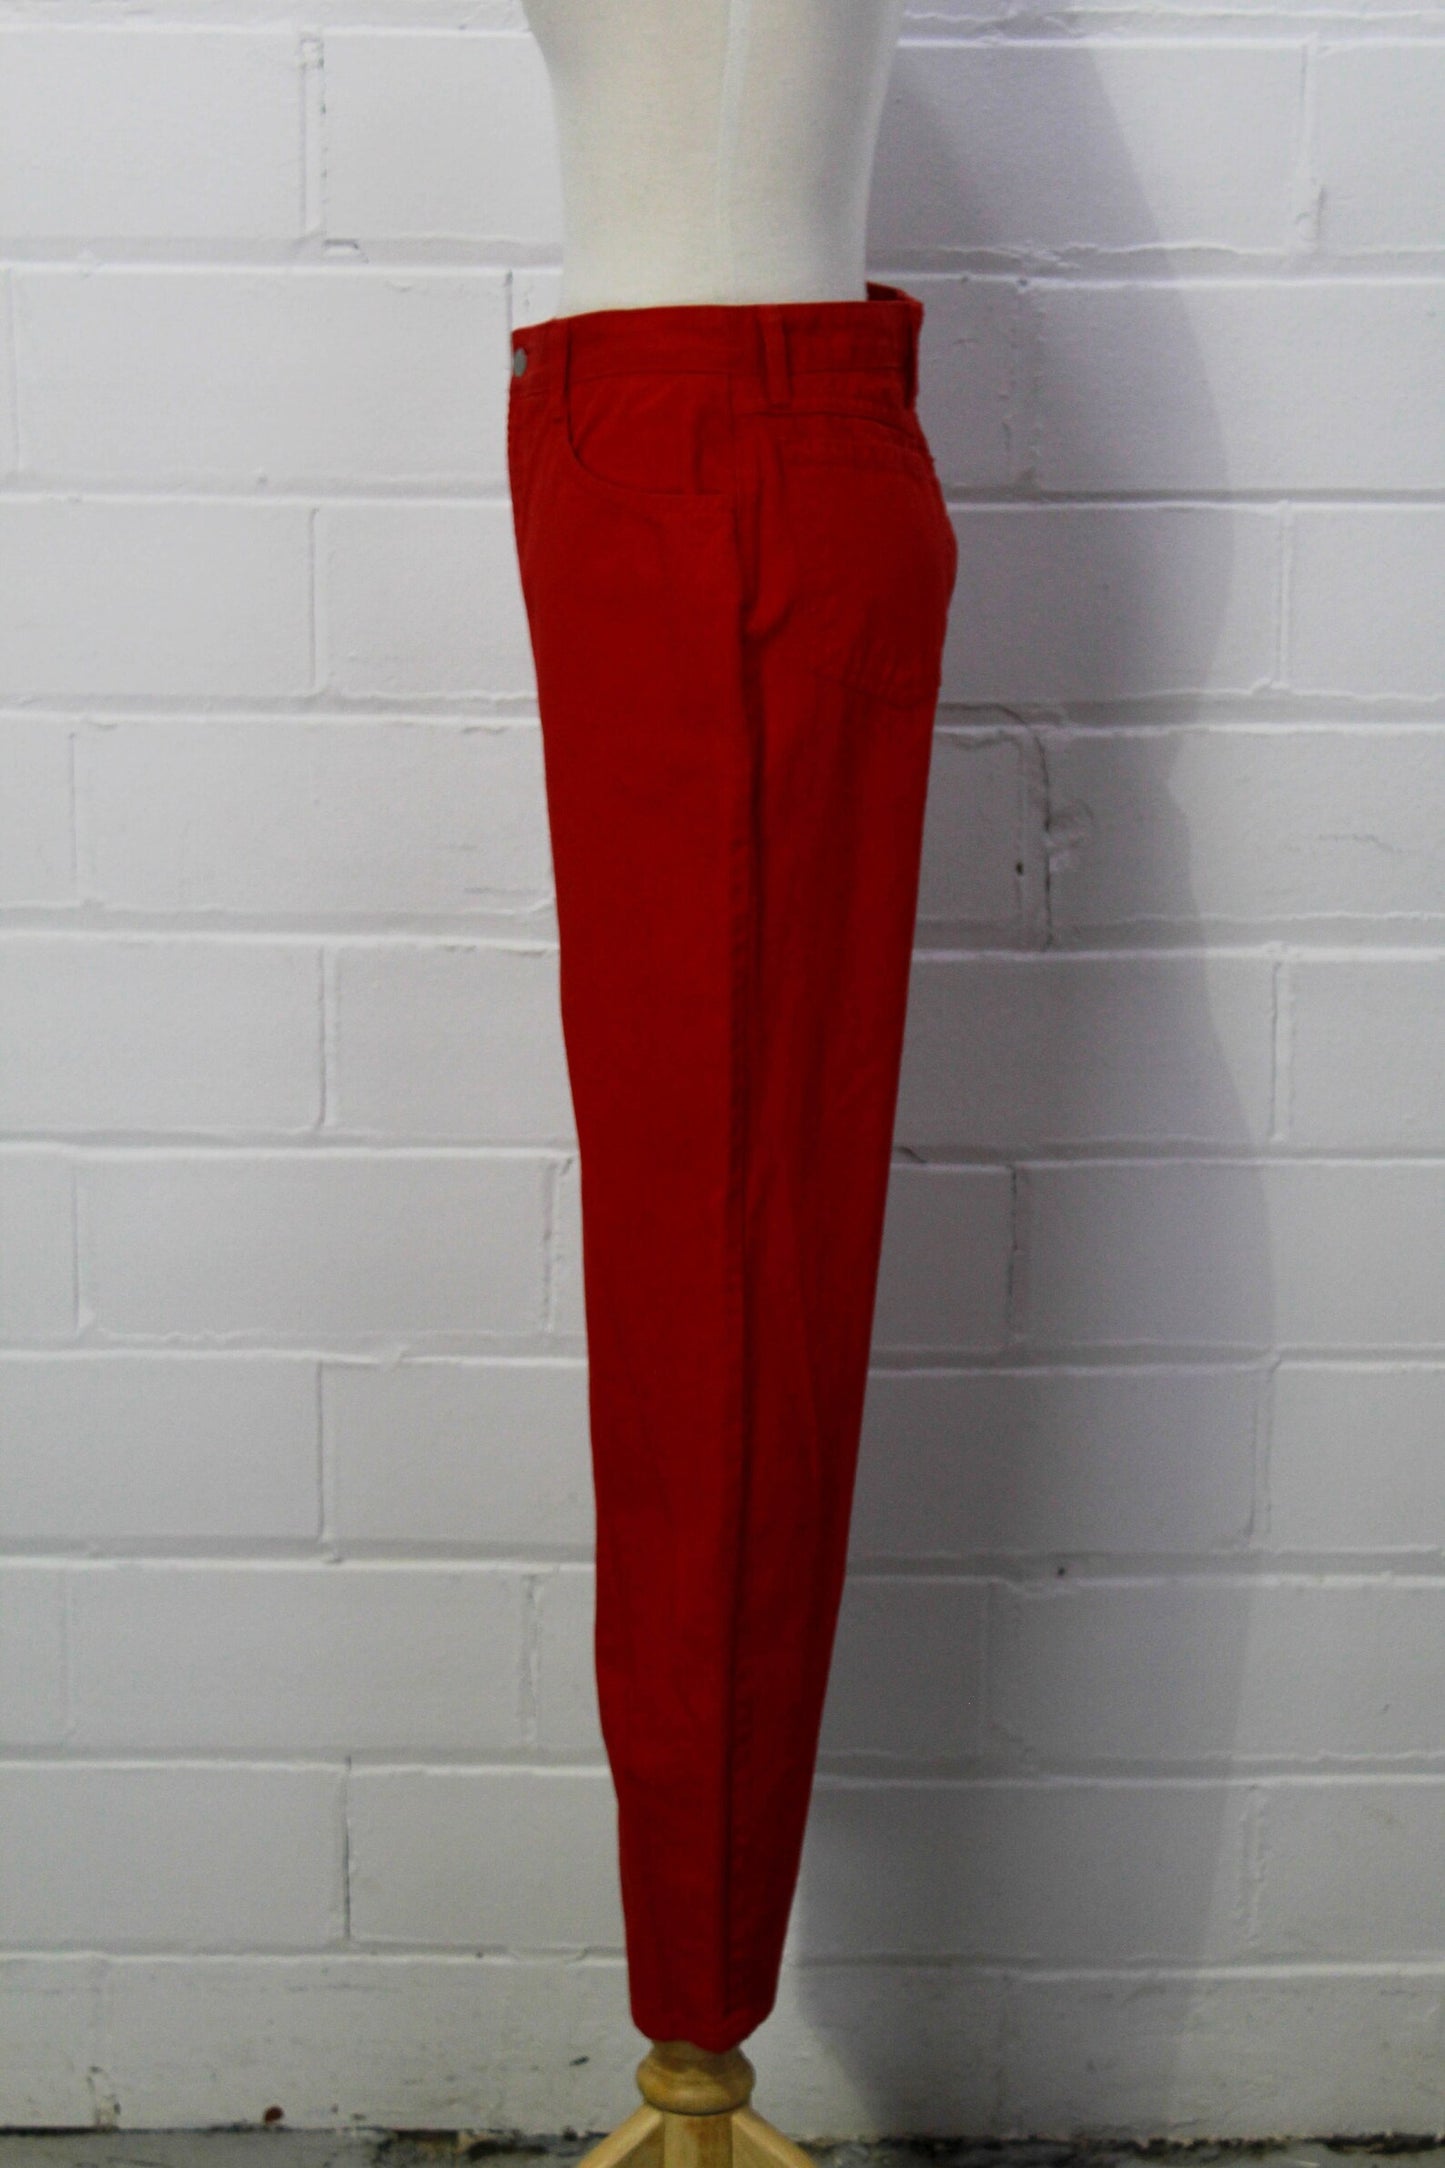 Perfect 80s red cotton high waisted denim jeans by Bongo. They have a 5 pocket design, and the Bongo logo on the back waist that reads "Always American Made". 